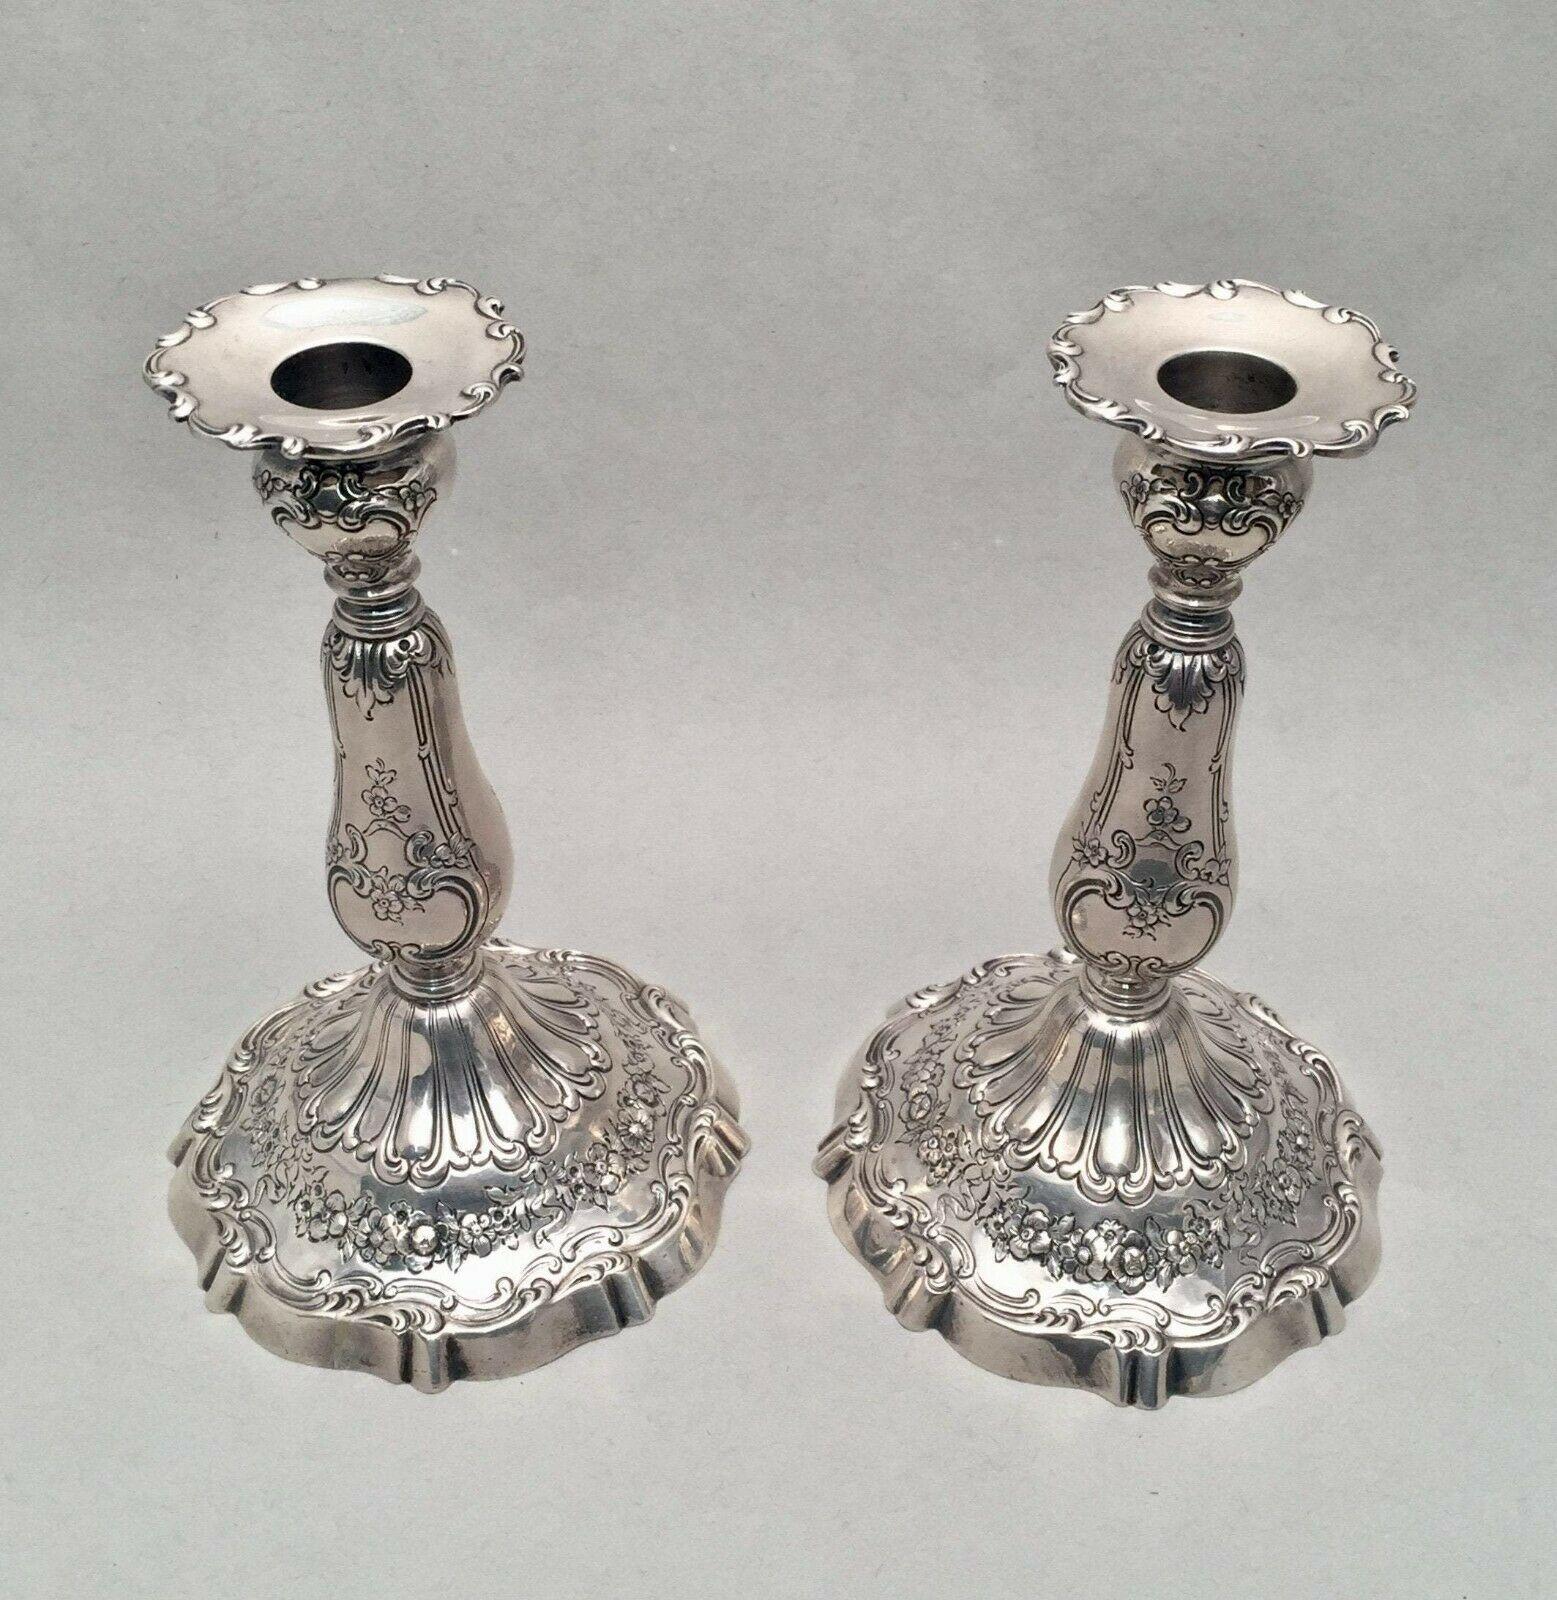 Pair of beautiful of sterling silver candlesticks / Shabbos candlesticks by American maker Reed & Barton. Designed with enamoring flowers and scrolls. Border of bobeche designed in scroll pattern. Measuring 8 inches tall and 5 inches wide at base.